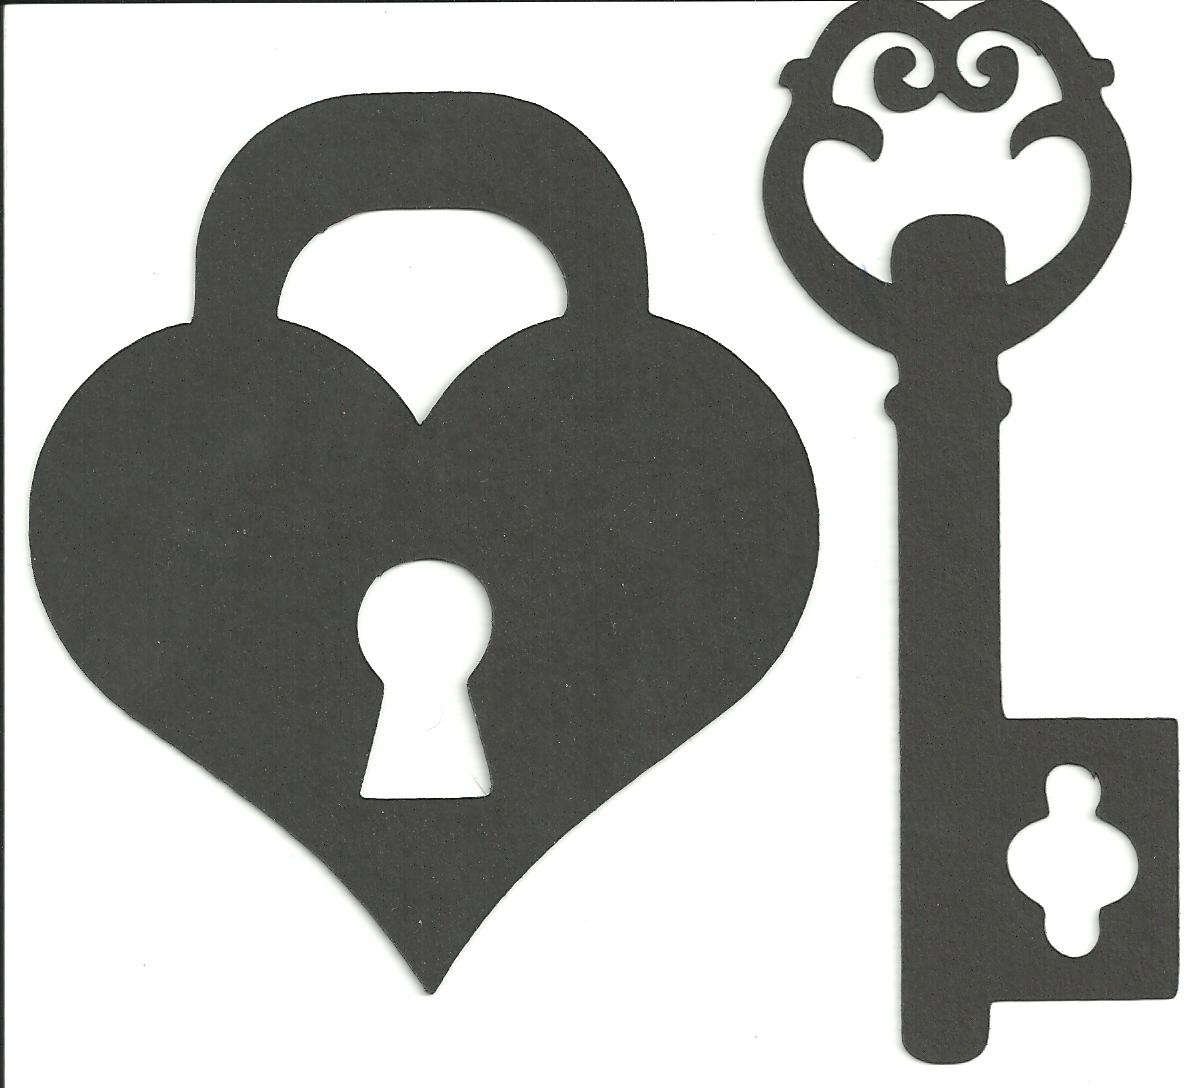 Download Jennifer Collector of Hobbies: Lock and Key Free Svg File